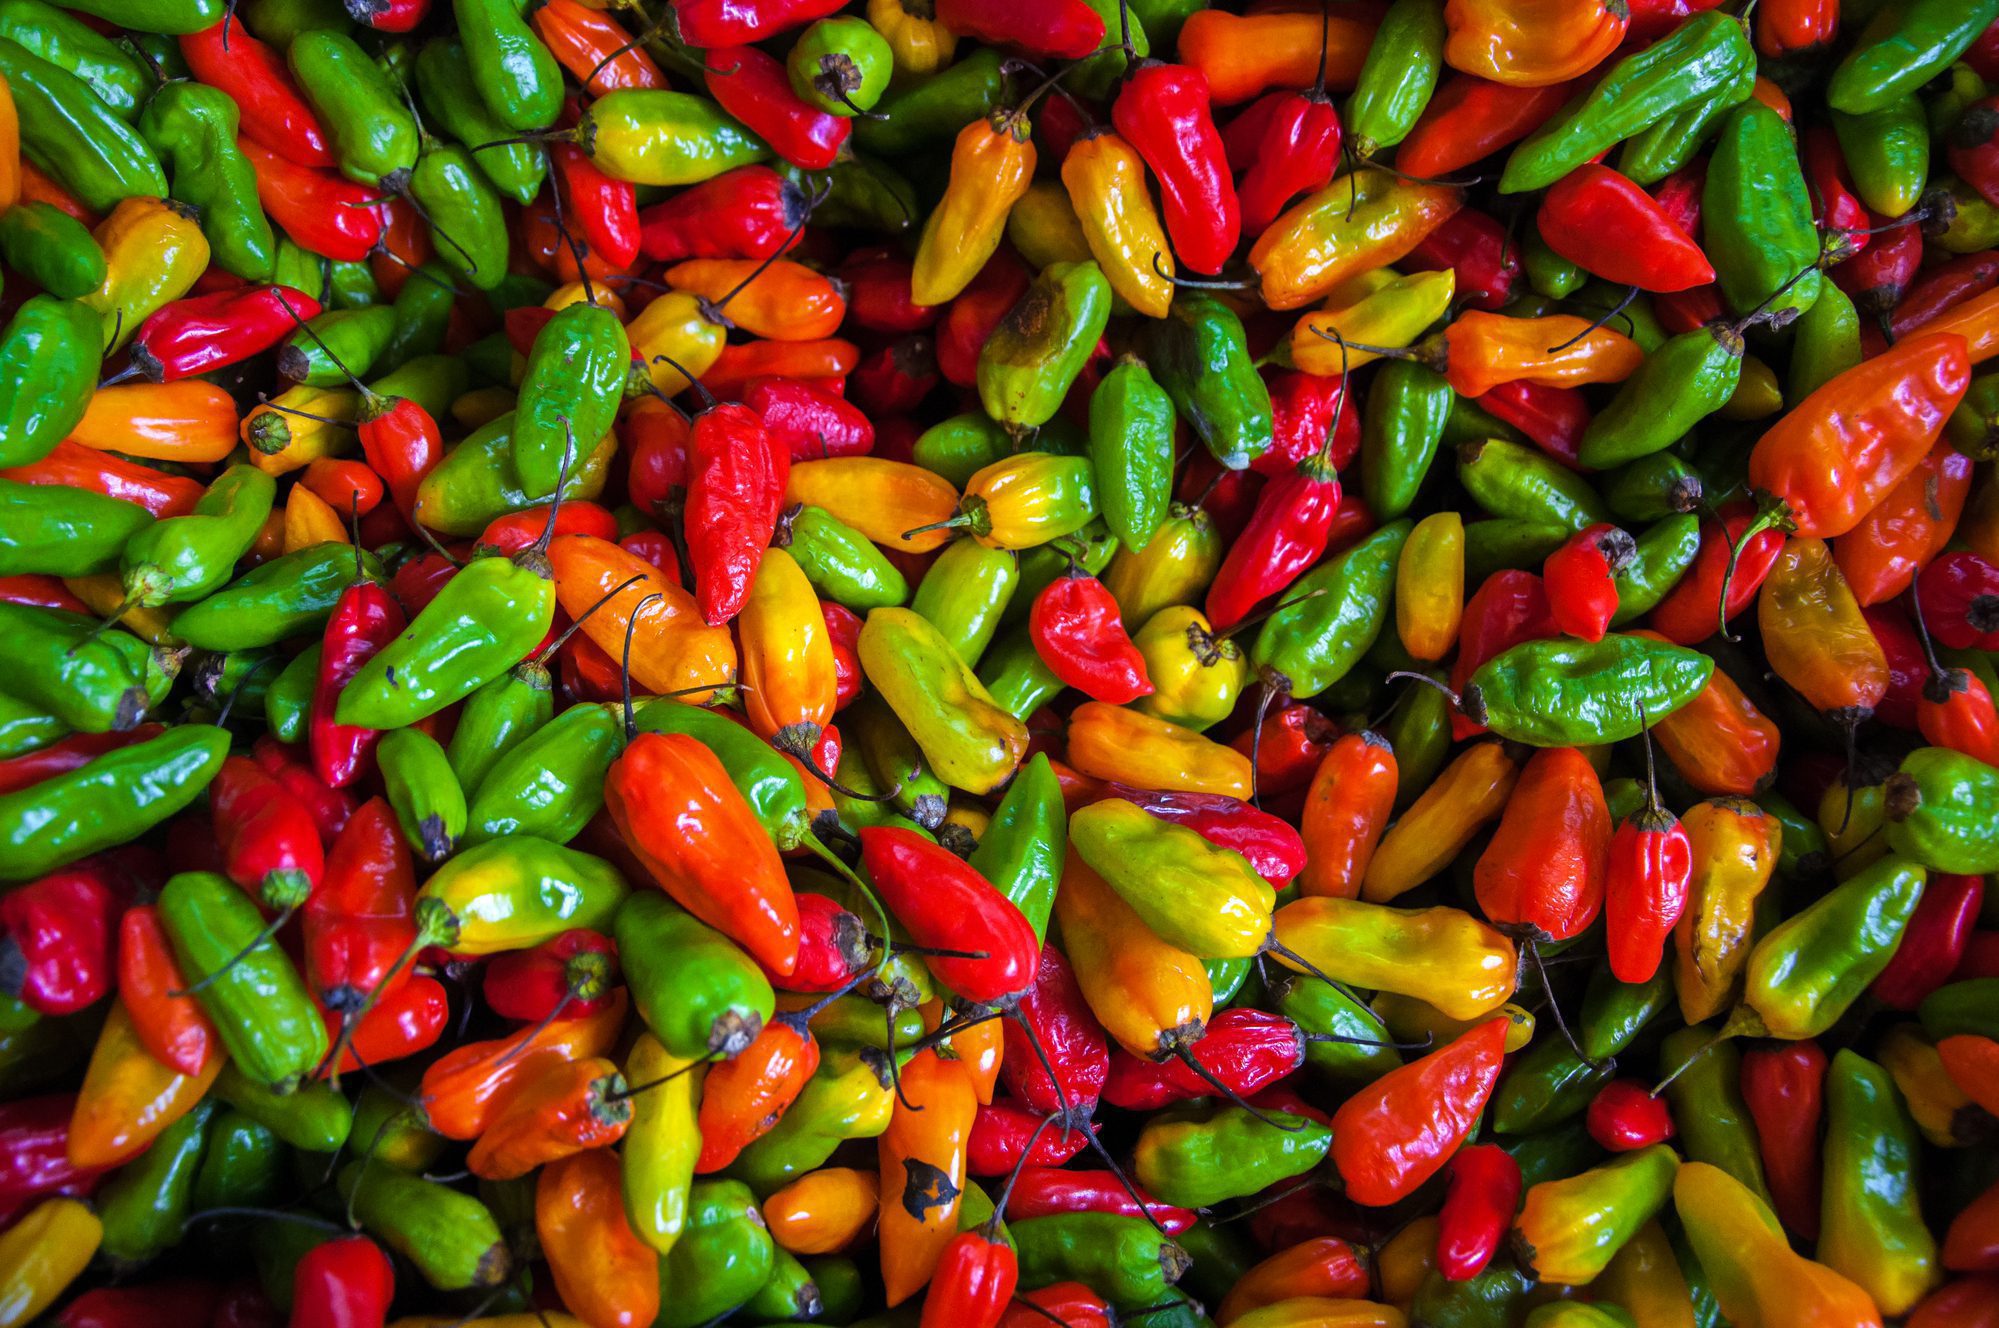 Colourful chili peppers